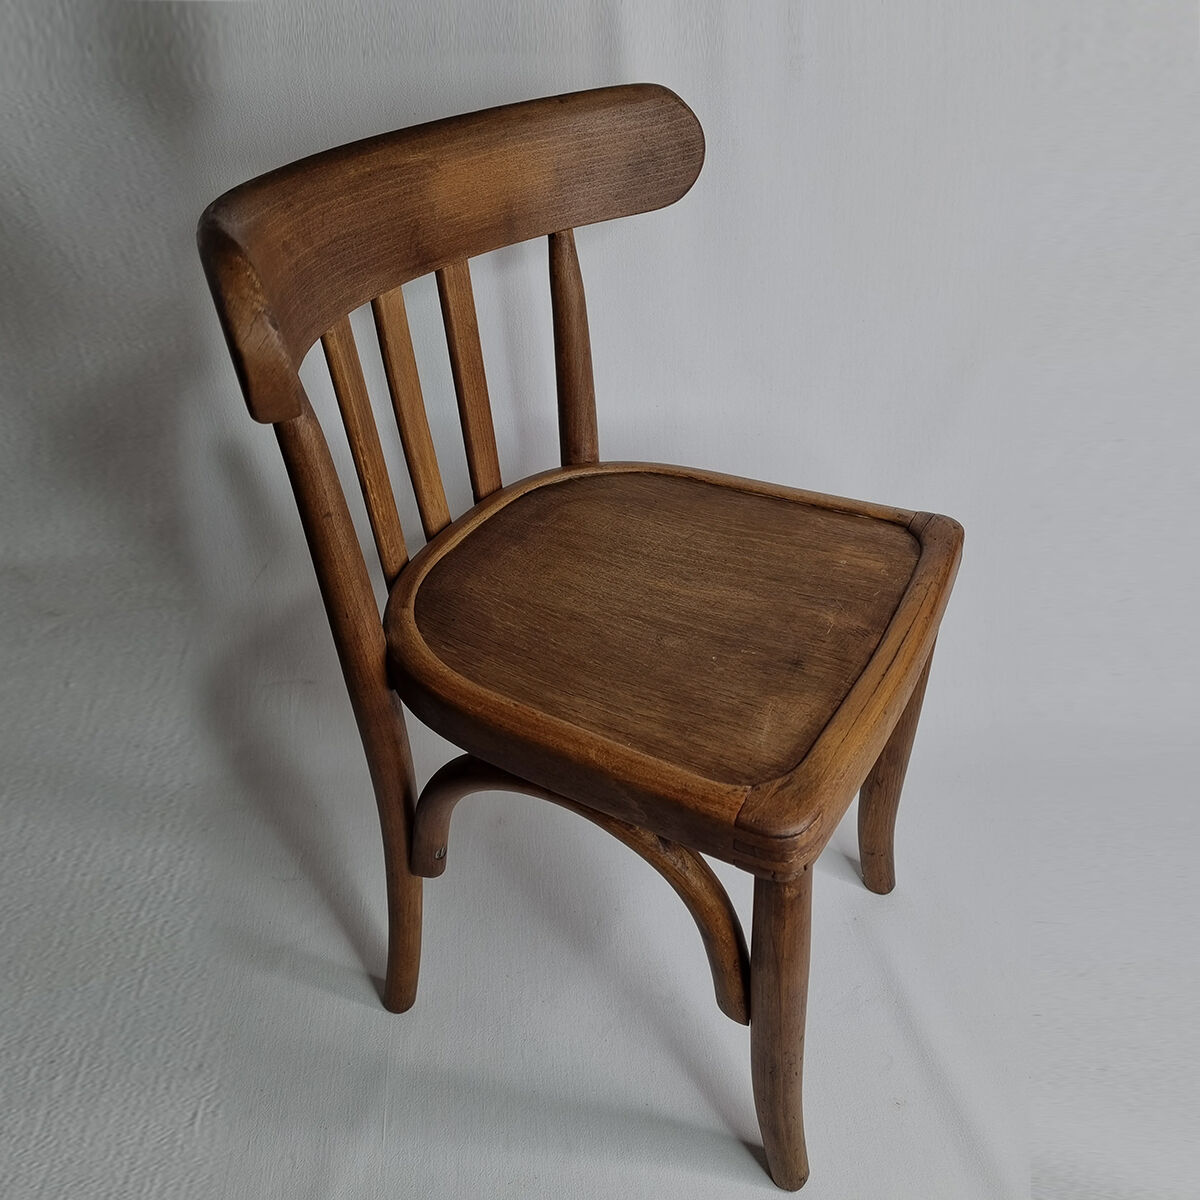 MORE WOODEN CHAIRS